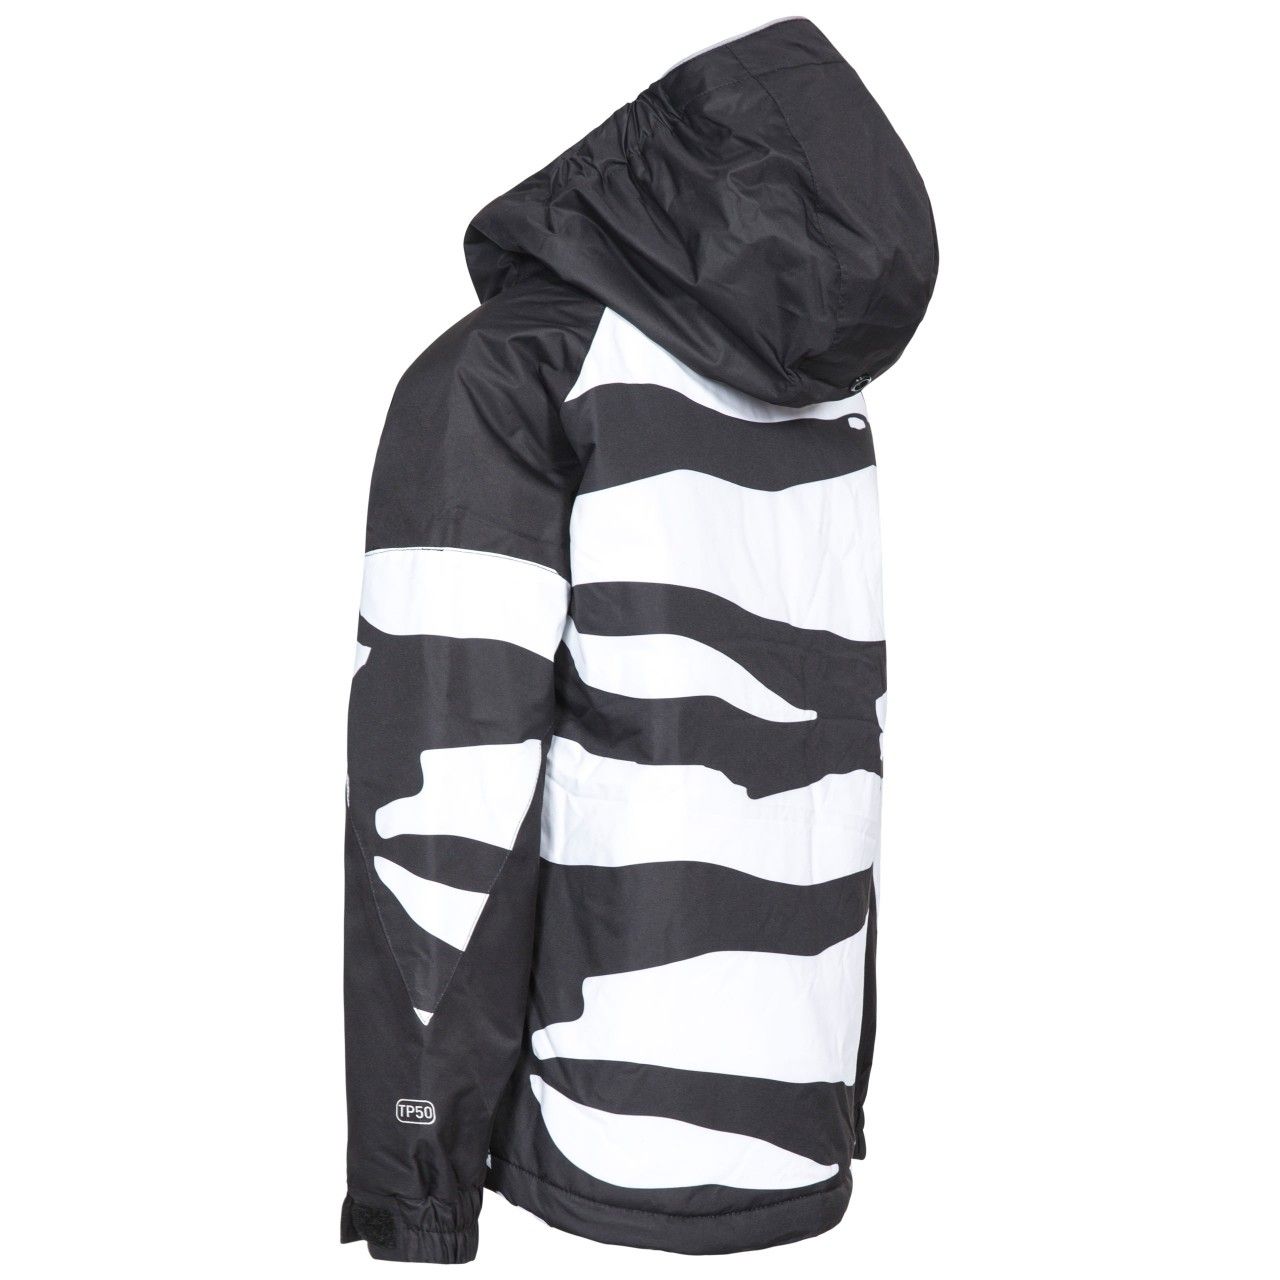 Padded. Printed panels. Contrast zippers. 3 zip pockets. 1 sleeve zip pocket. Detachable stud off hood. Inner snowbreak. Elasticated cuff with touch fastening. Waterproof 3000mm, windproof, taped seams. Shell: 100% Polyester, PU coating, Lining: 100% Polyester, Filling: 100% Polyester. Trespass Childrens Chest Sizing (approx): 2/3 Years - 21in/53cm, 3/4 Years - 22in/56cm, 5/6 Years - 24in/61cm, 7/8 Years - 26in/66cm, 9/10 Years - 28in/71cm, 11/12 Years - 31in/79cm.